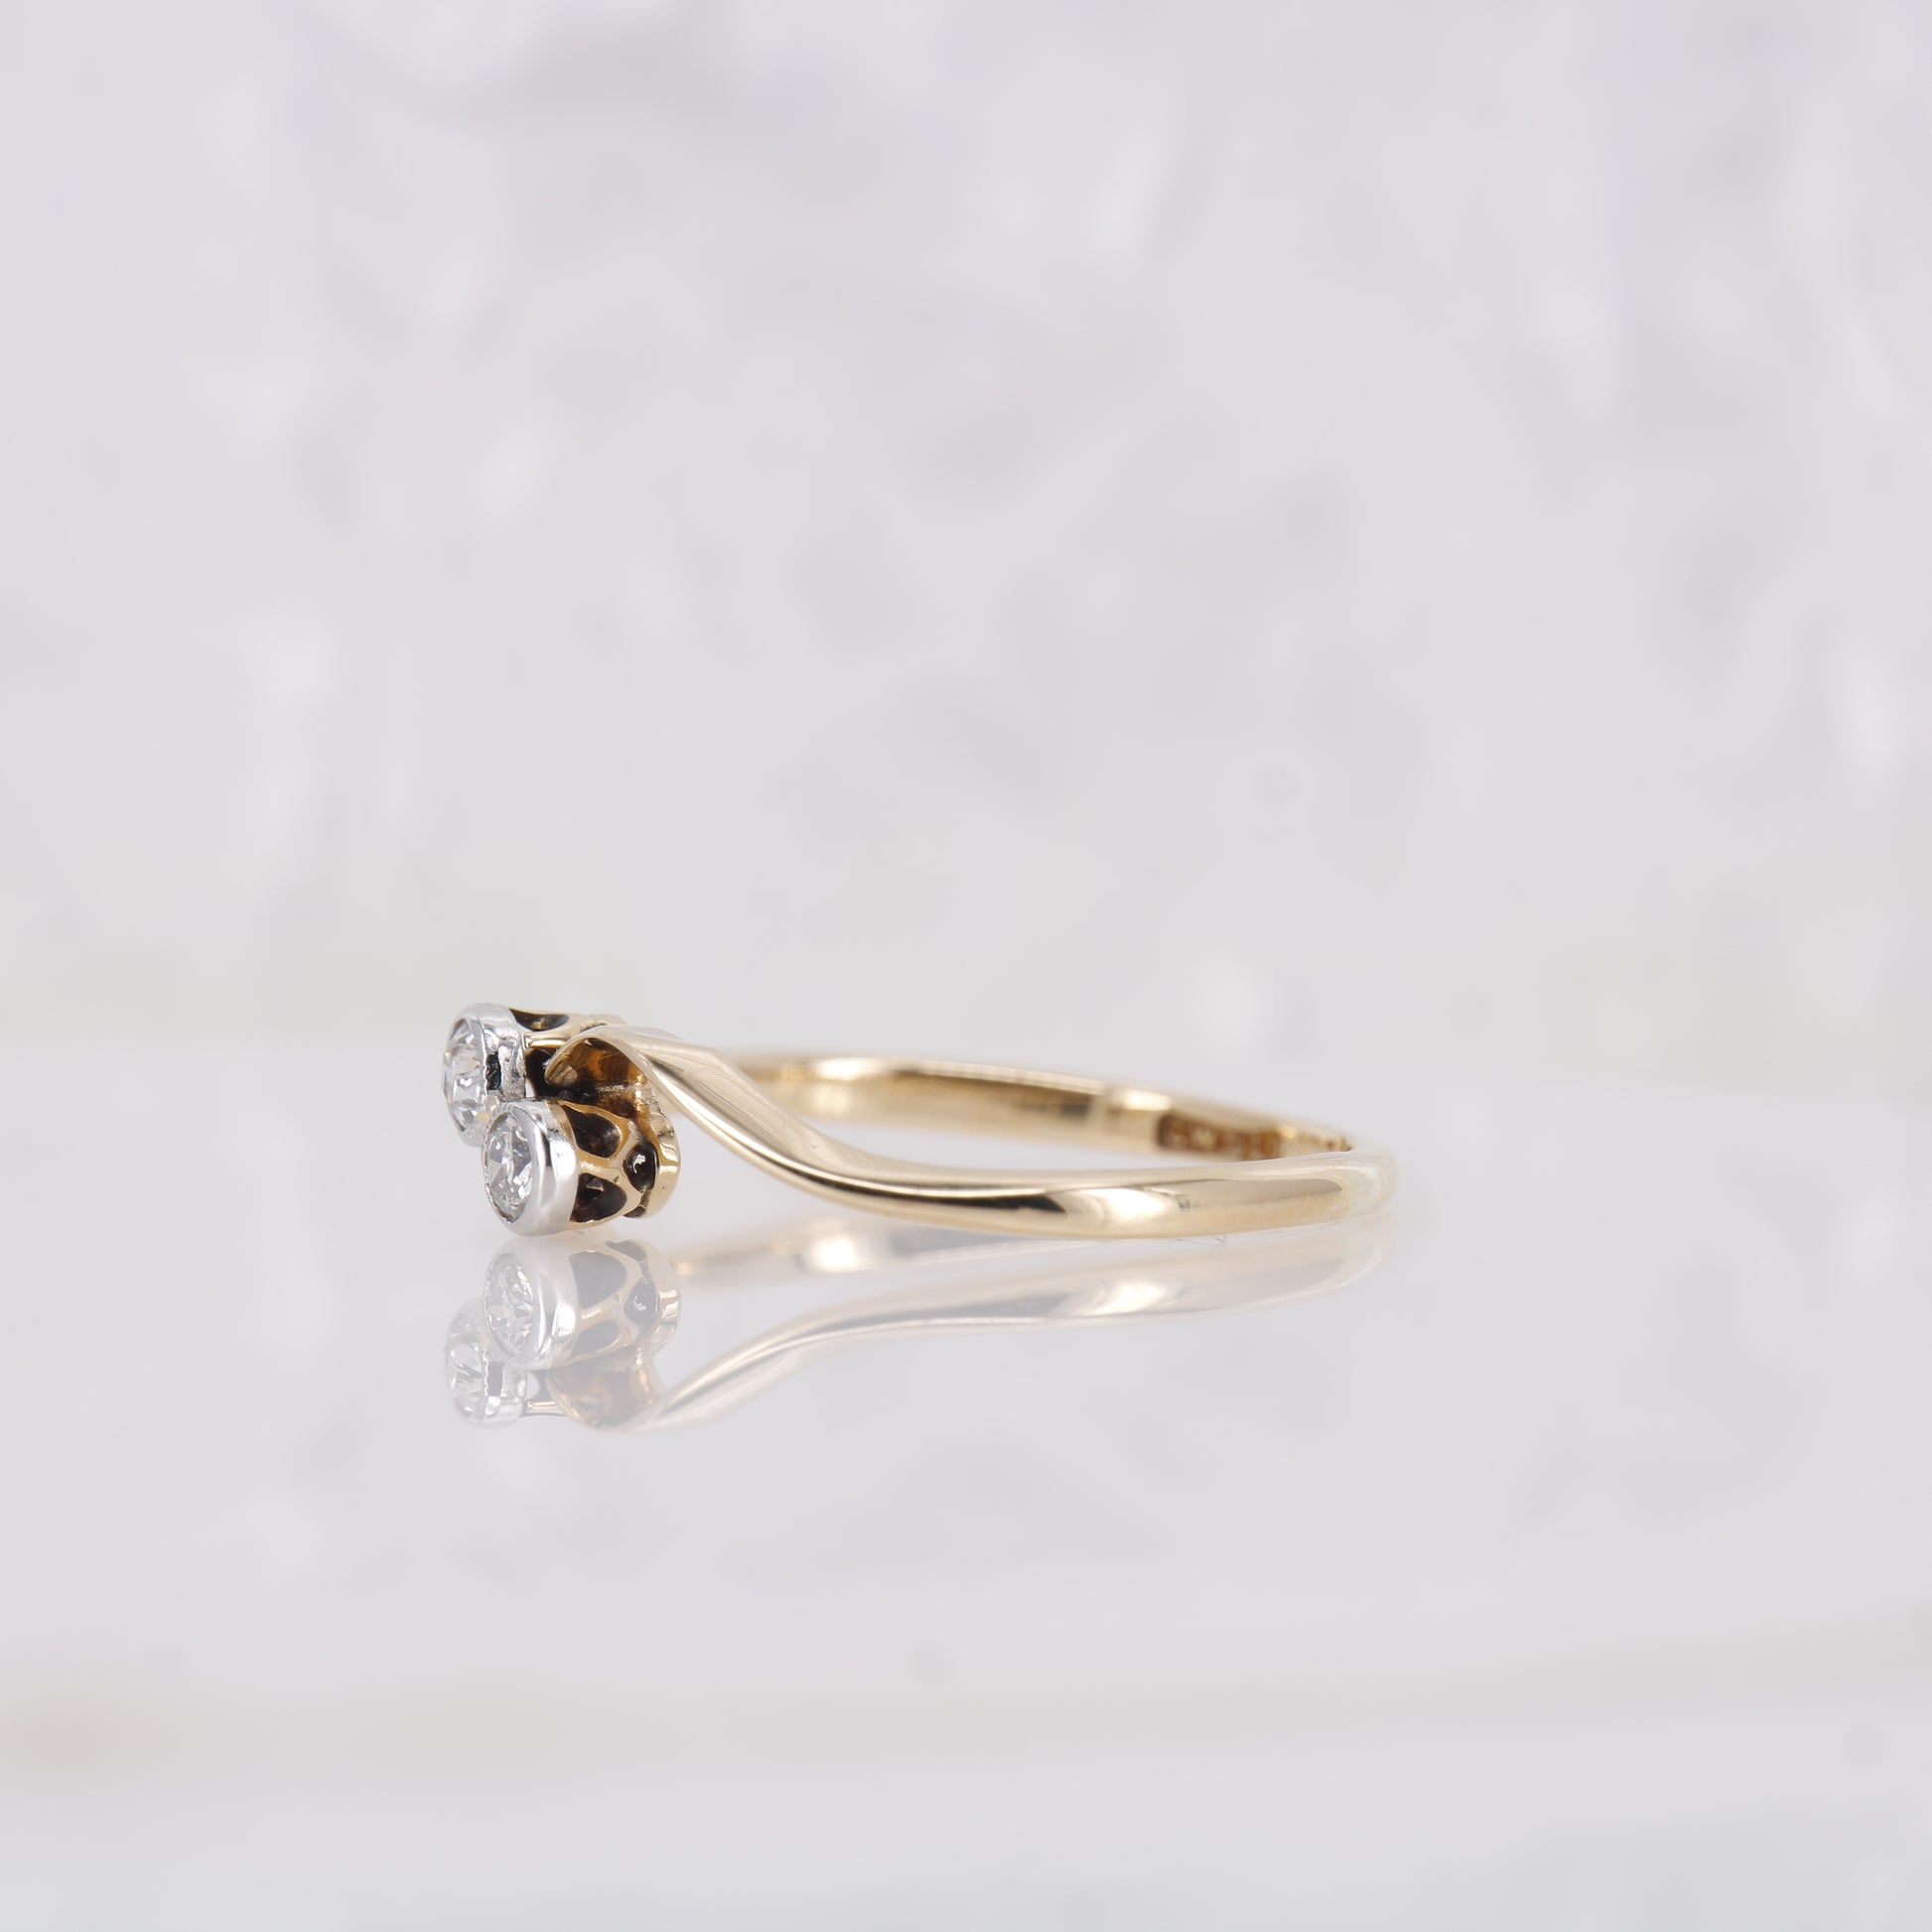 18ct Gold Antique Diamond Ring,Two Stone 18k Yellow Gold,Toi et Moi Ring,Antique,Engagement Ring 1930's